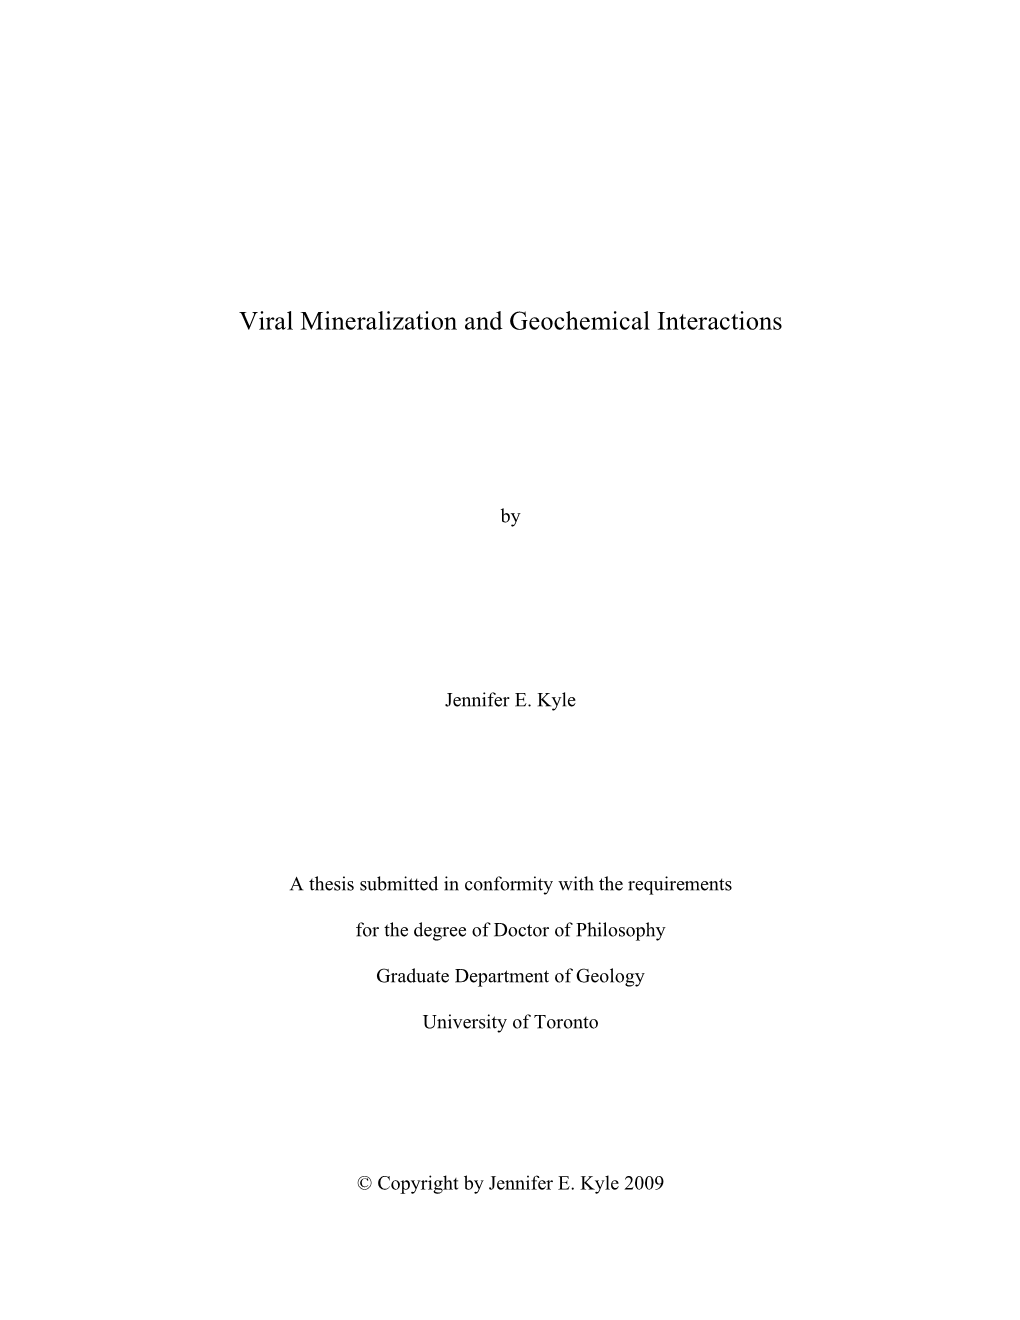 Viral Mineralization and Geochemical Interactions